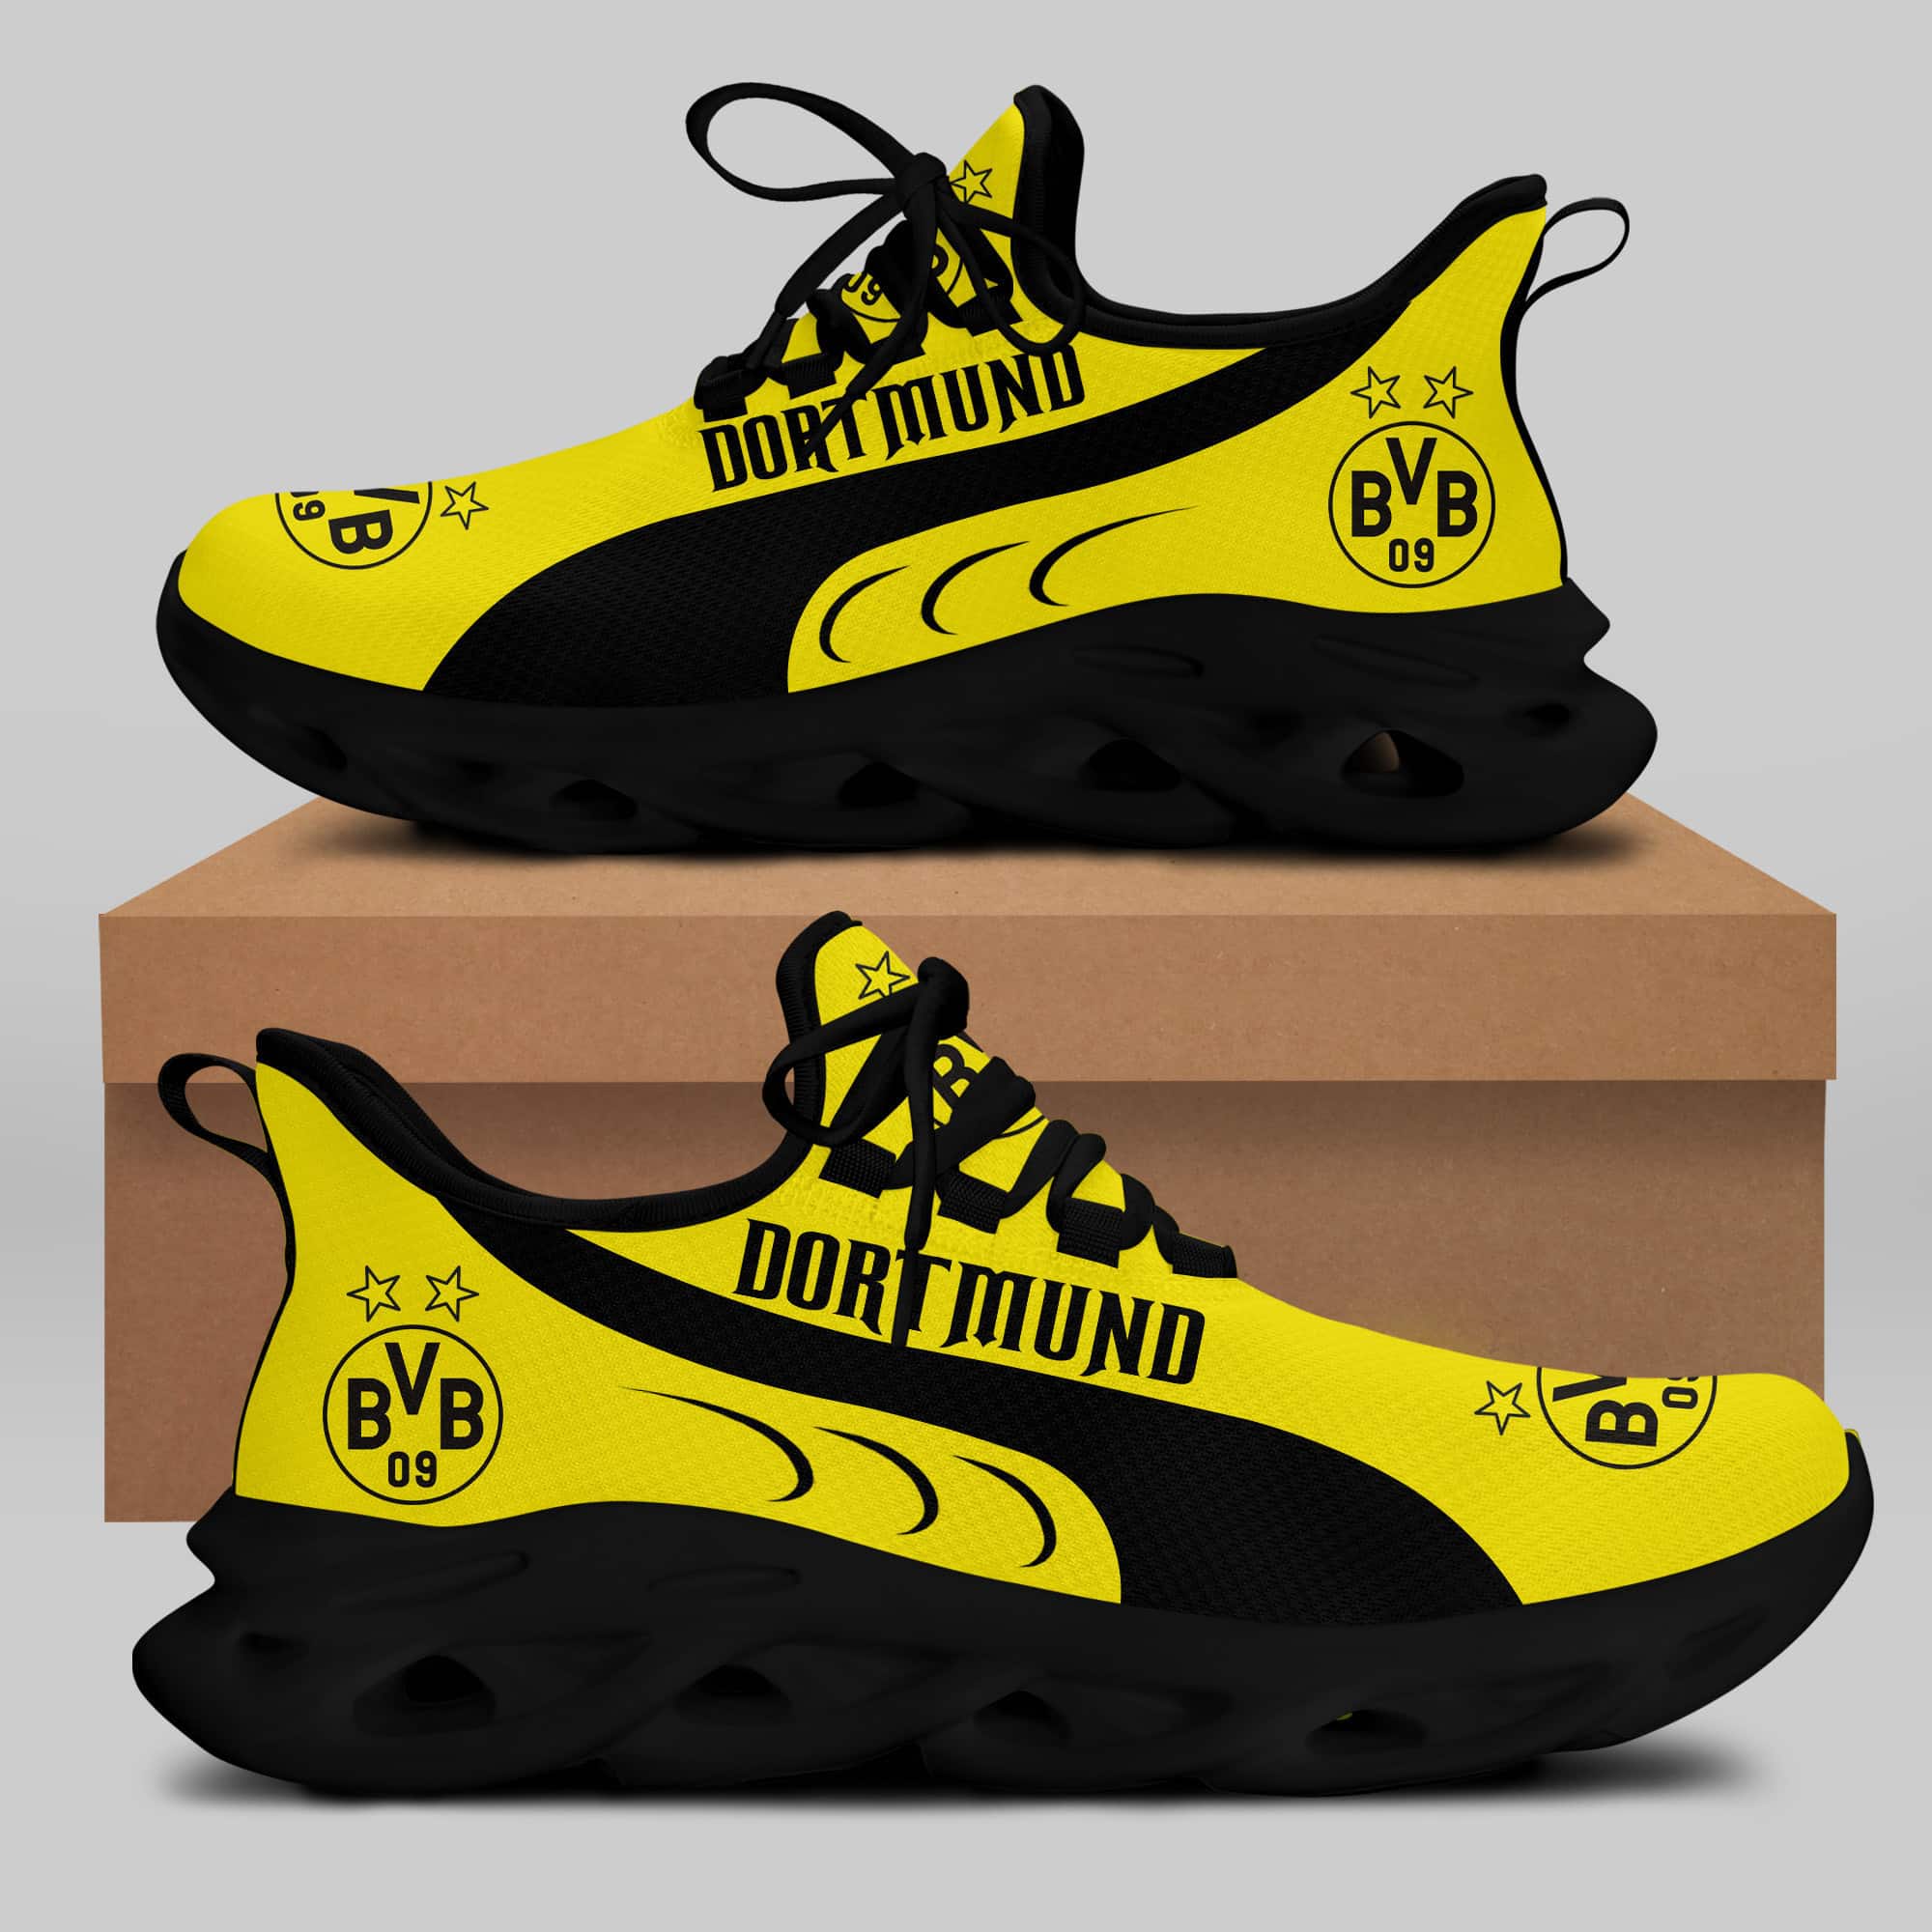 Borussia Dortmund Running Shoes Max Soul Shoes Sneakers Ver 1 1